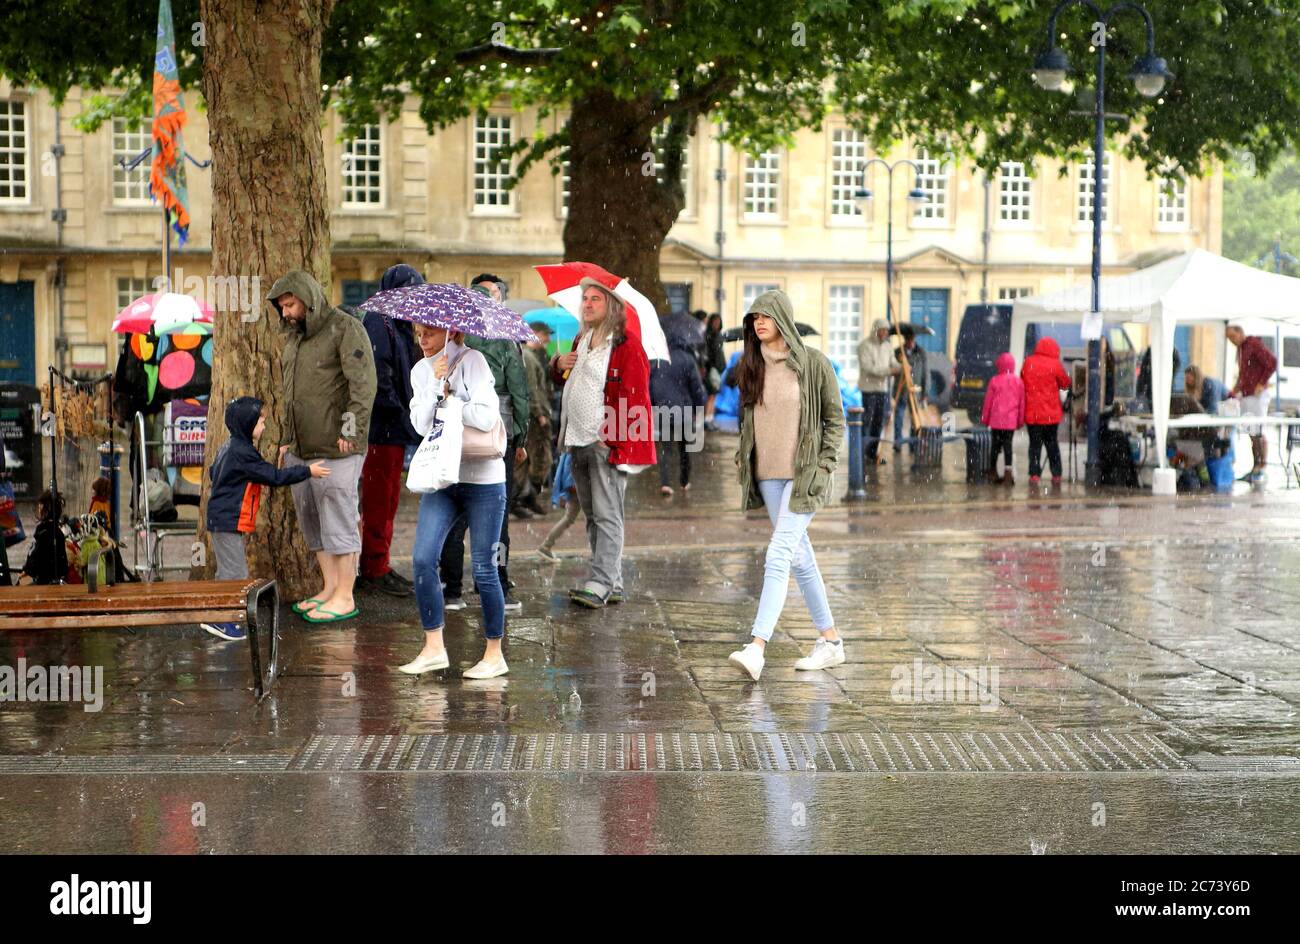 Rainy day at  Kingsmead Square,Bath,Somerset,England.The photo was taken on 4th of June,2017. Stock Photo